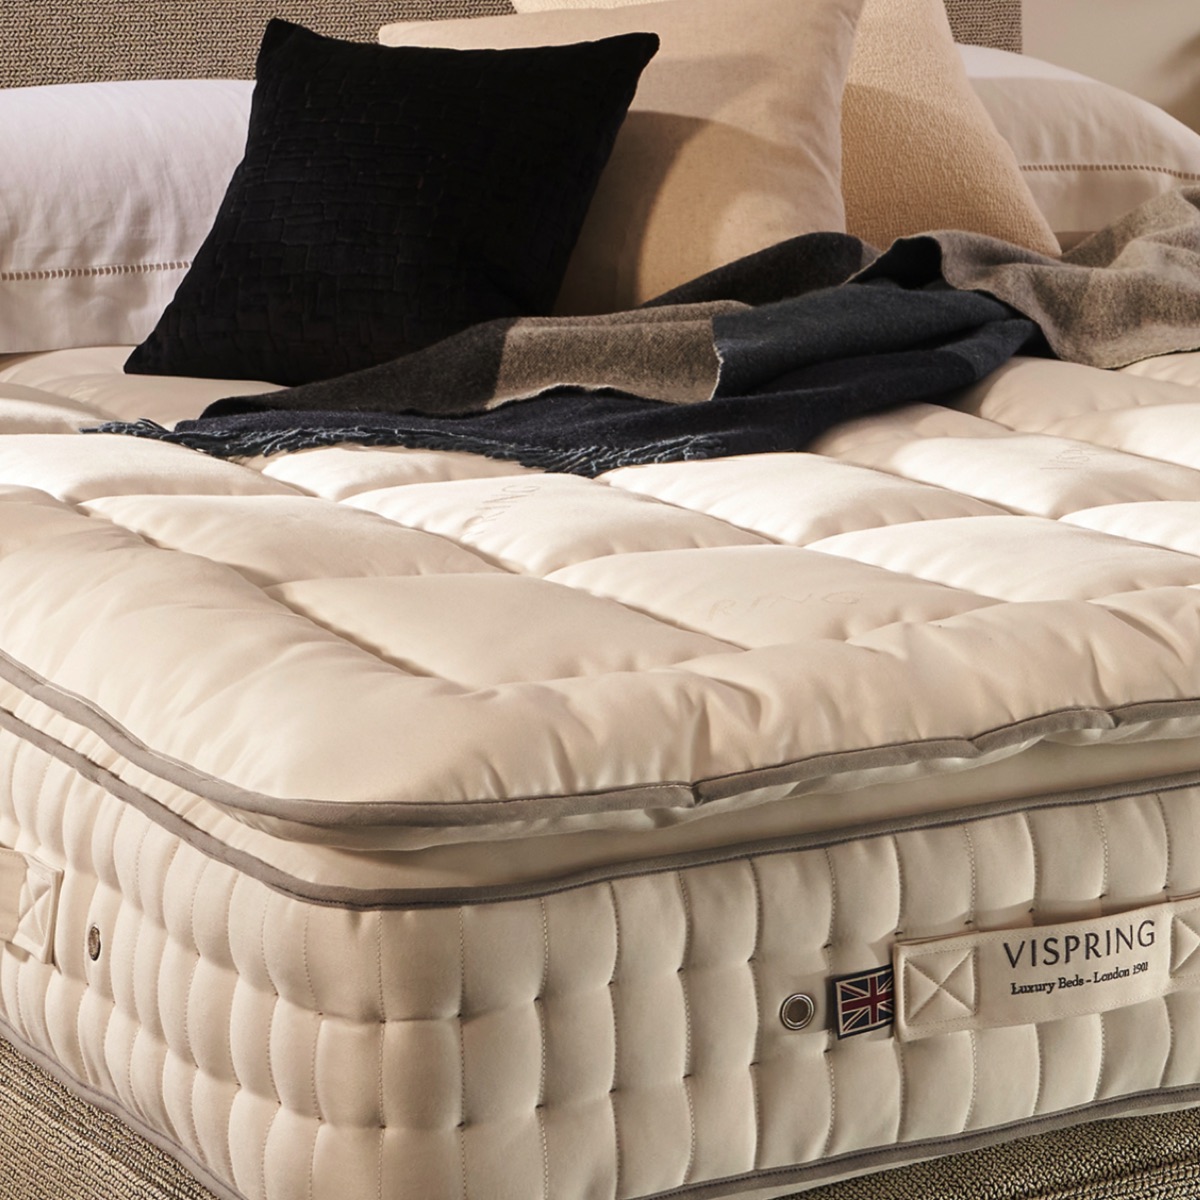 Complete guide to Vispring mattress toppers